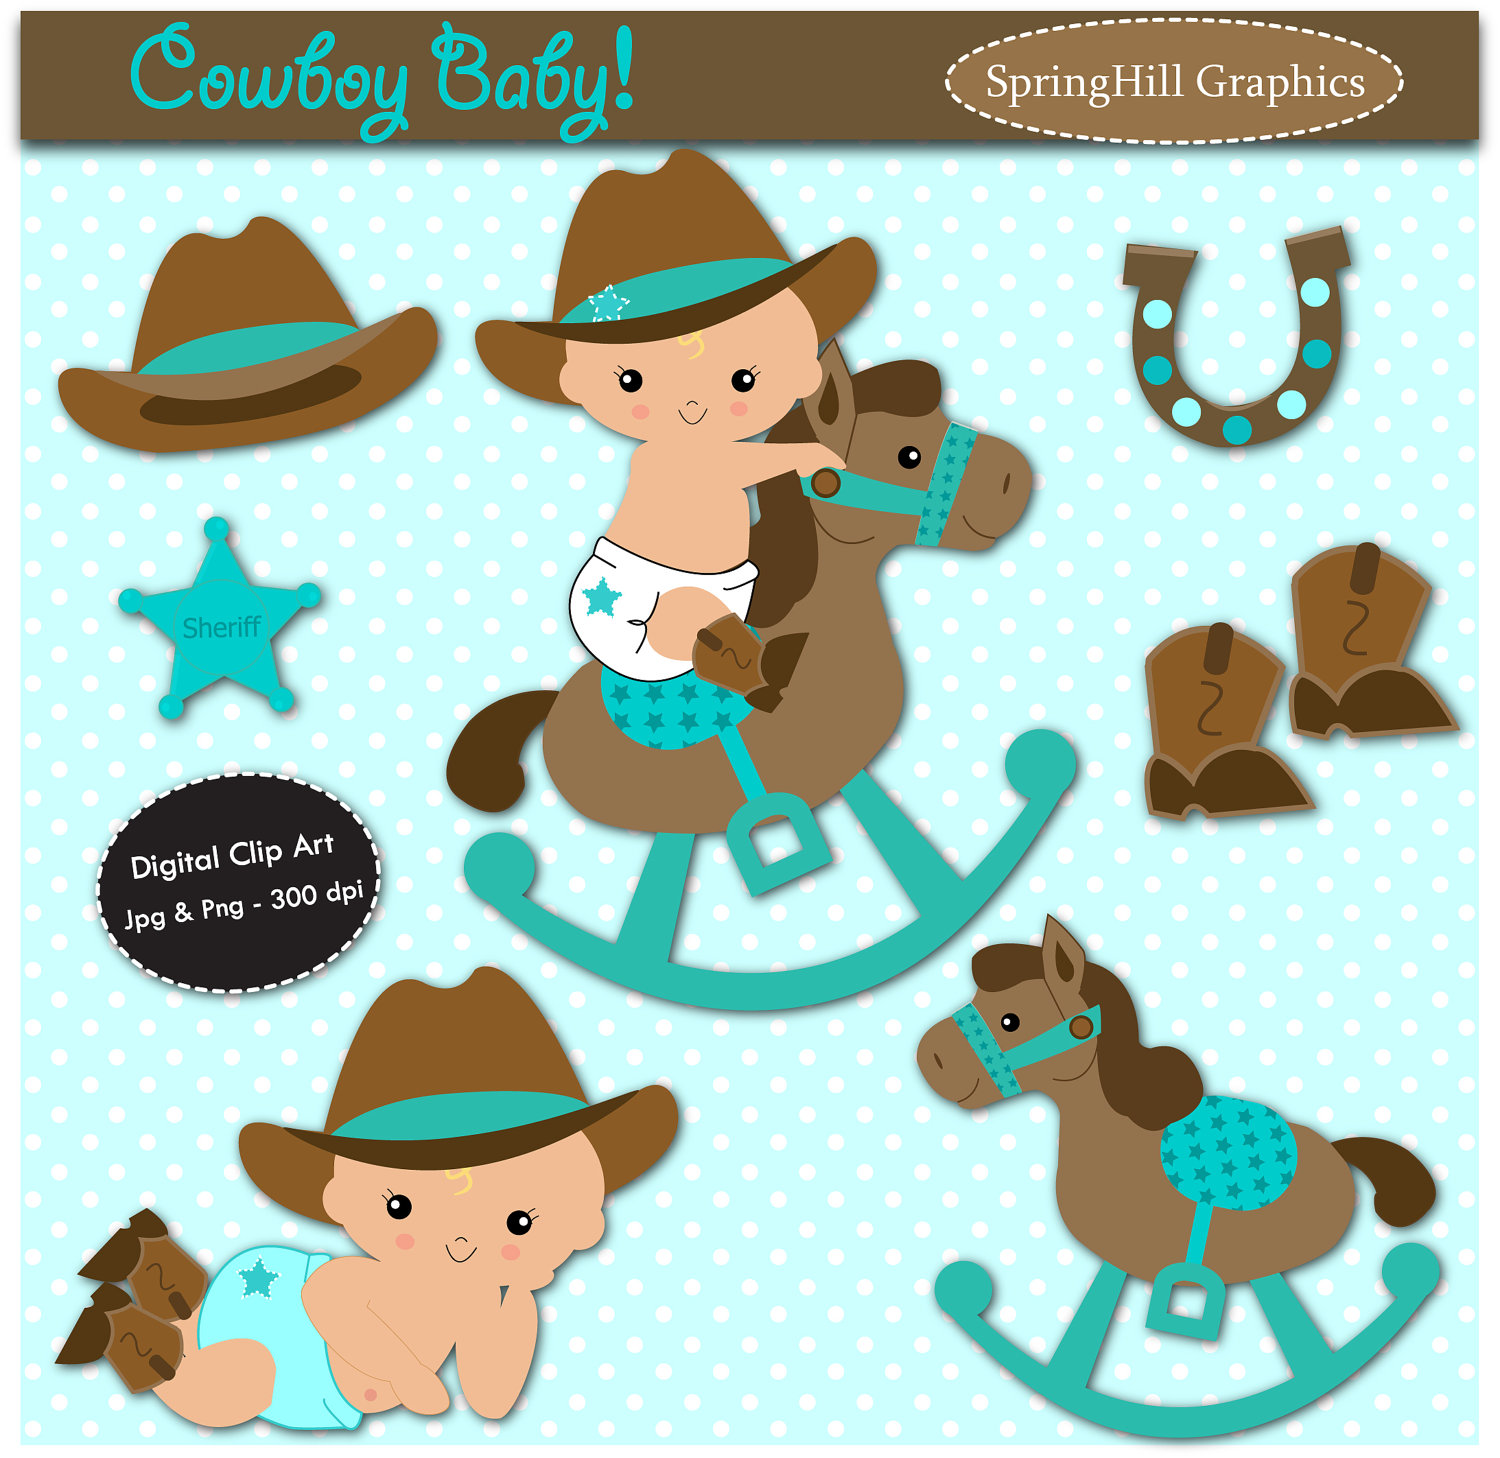 Instant Download Baby Cowboy Digital Clip By Springhillgraphics